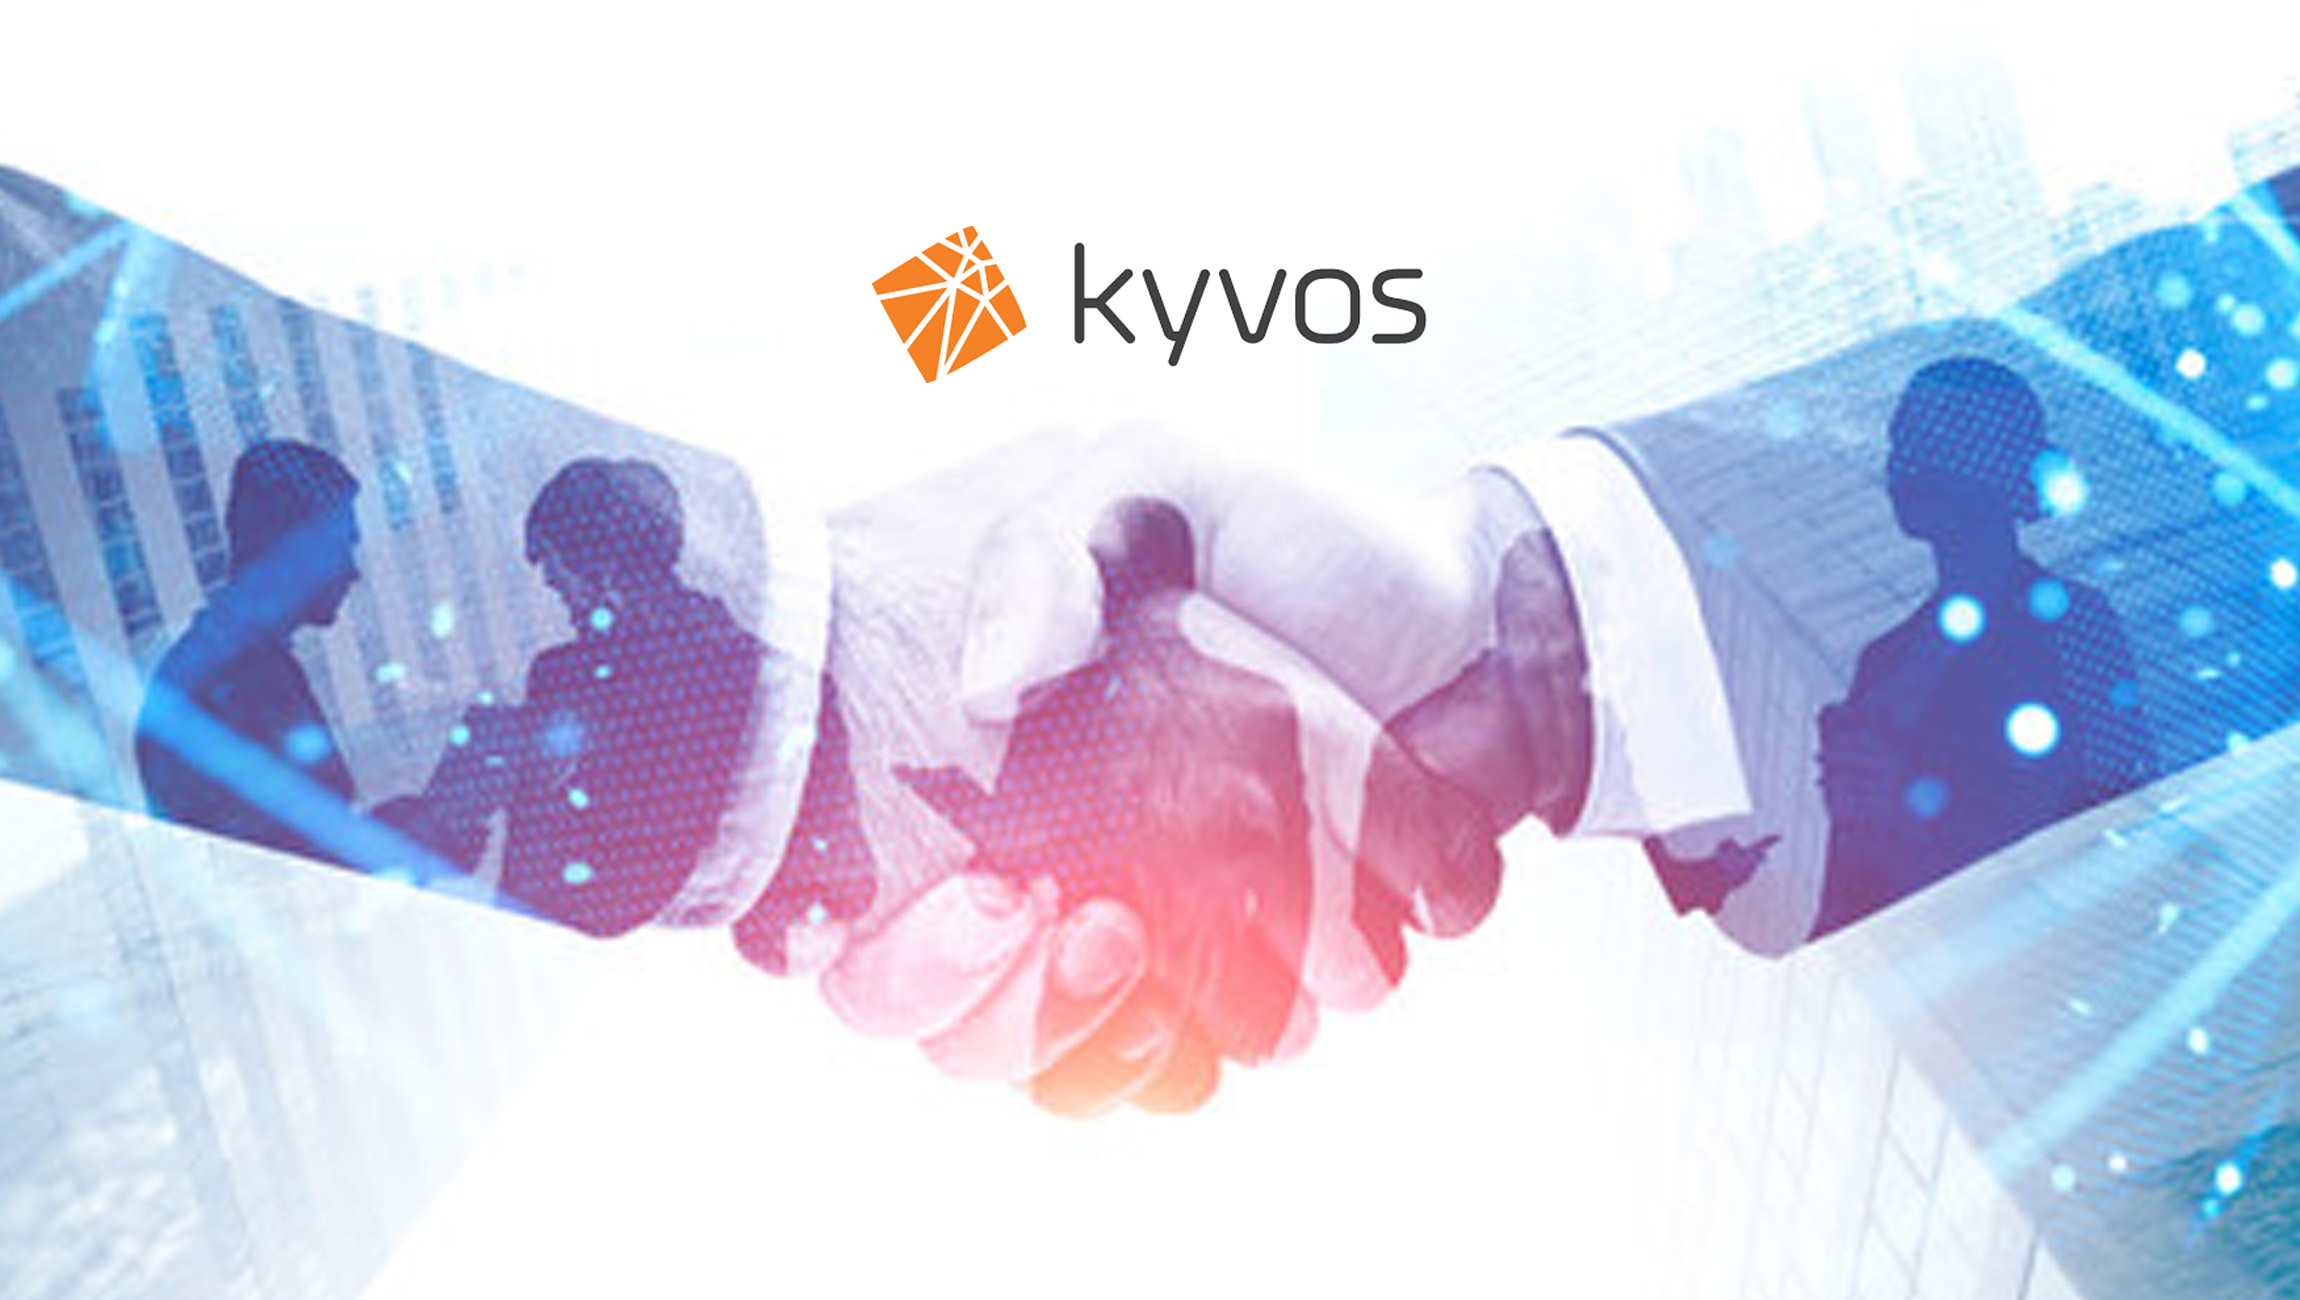 Kyvos Launches its Partner Program In EU To Drive BI Acceleration and Support Customers